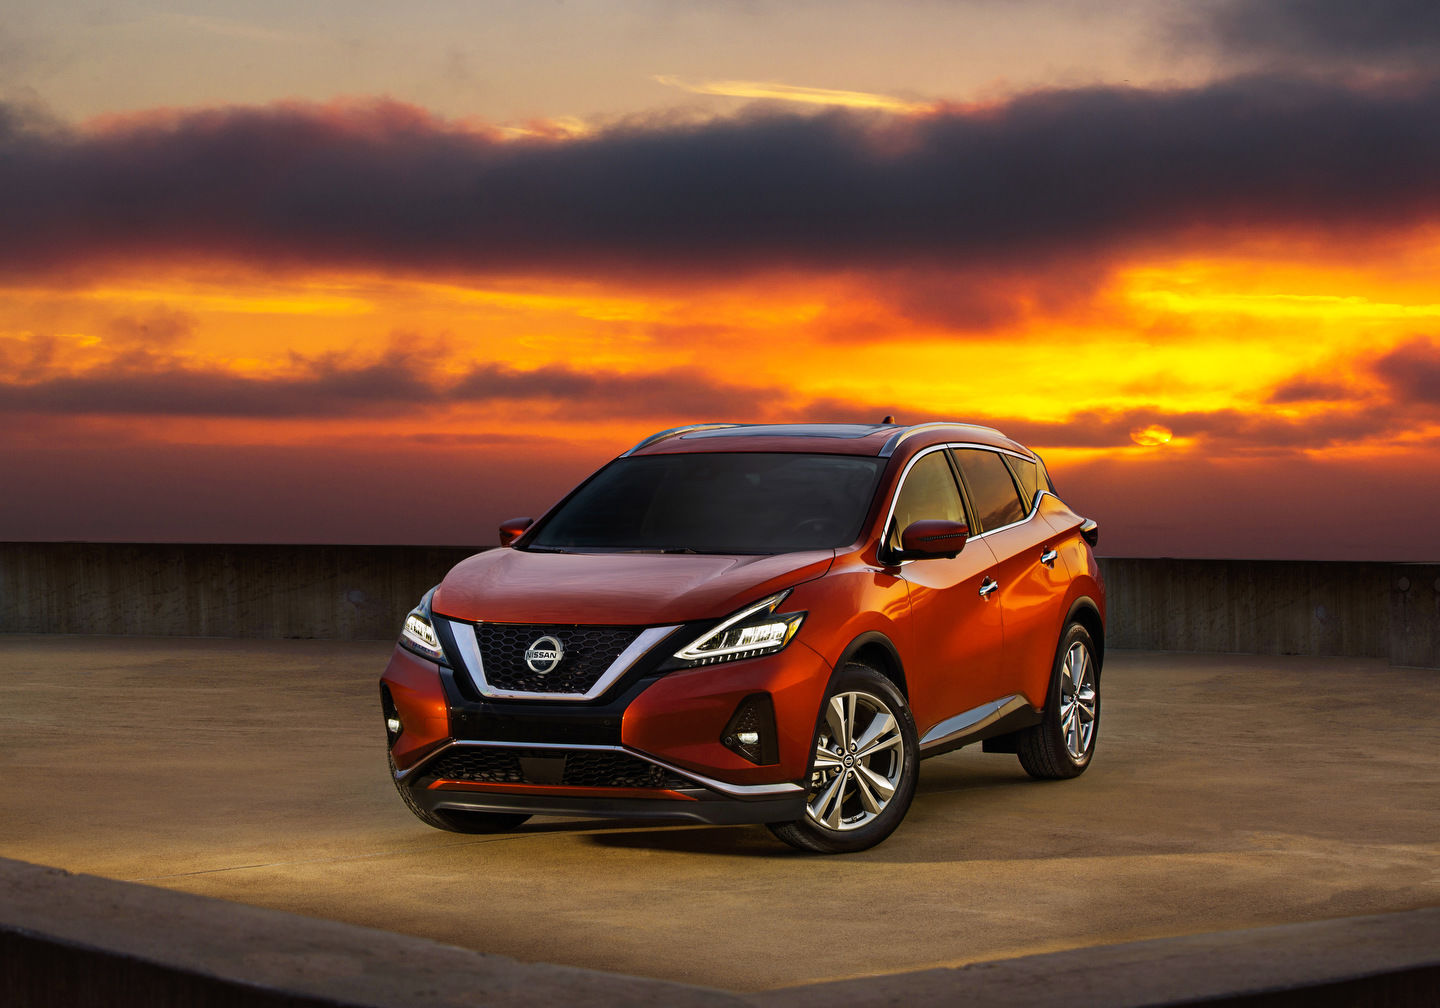 Five pre-owned Nissan SUVs to consider if you are looking for great towing capability